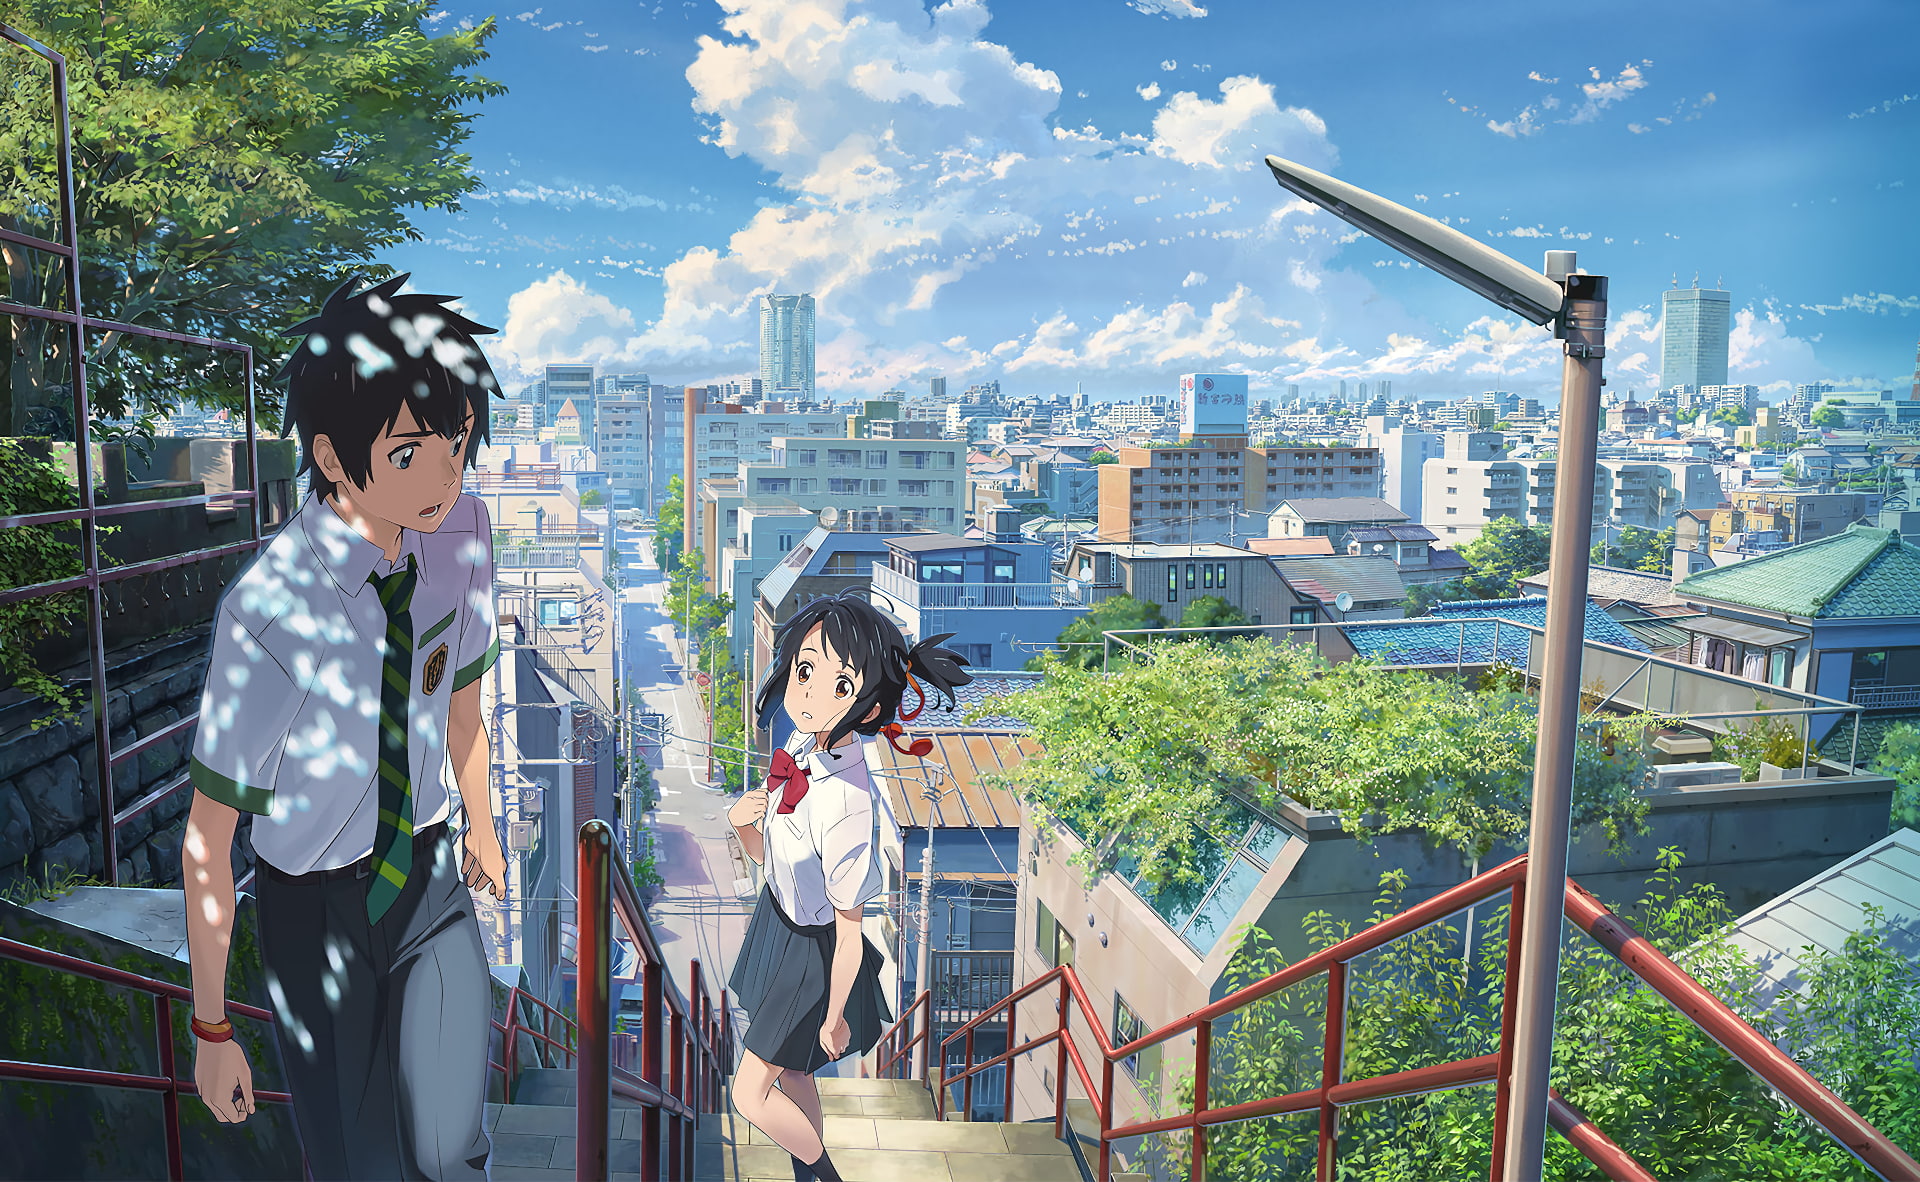 Trans Allegories in Film: ‘Your Name’ (2016)